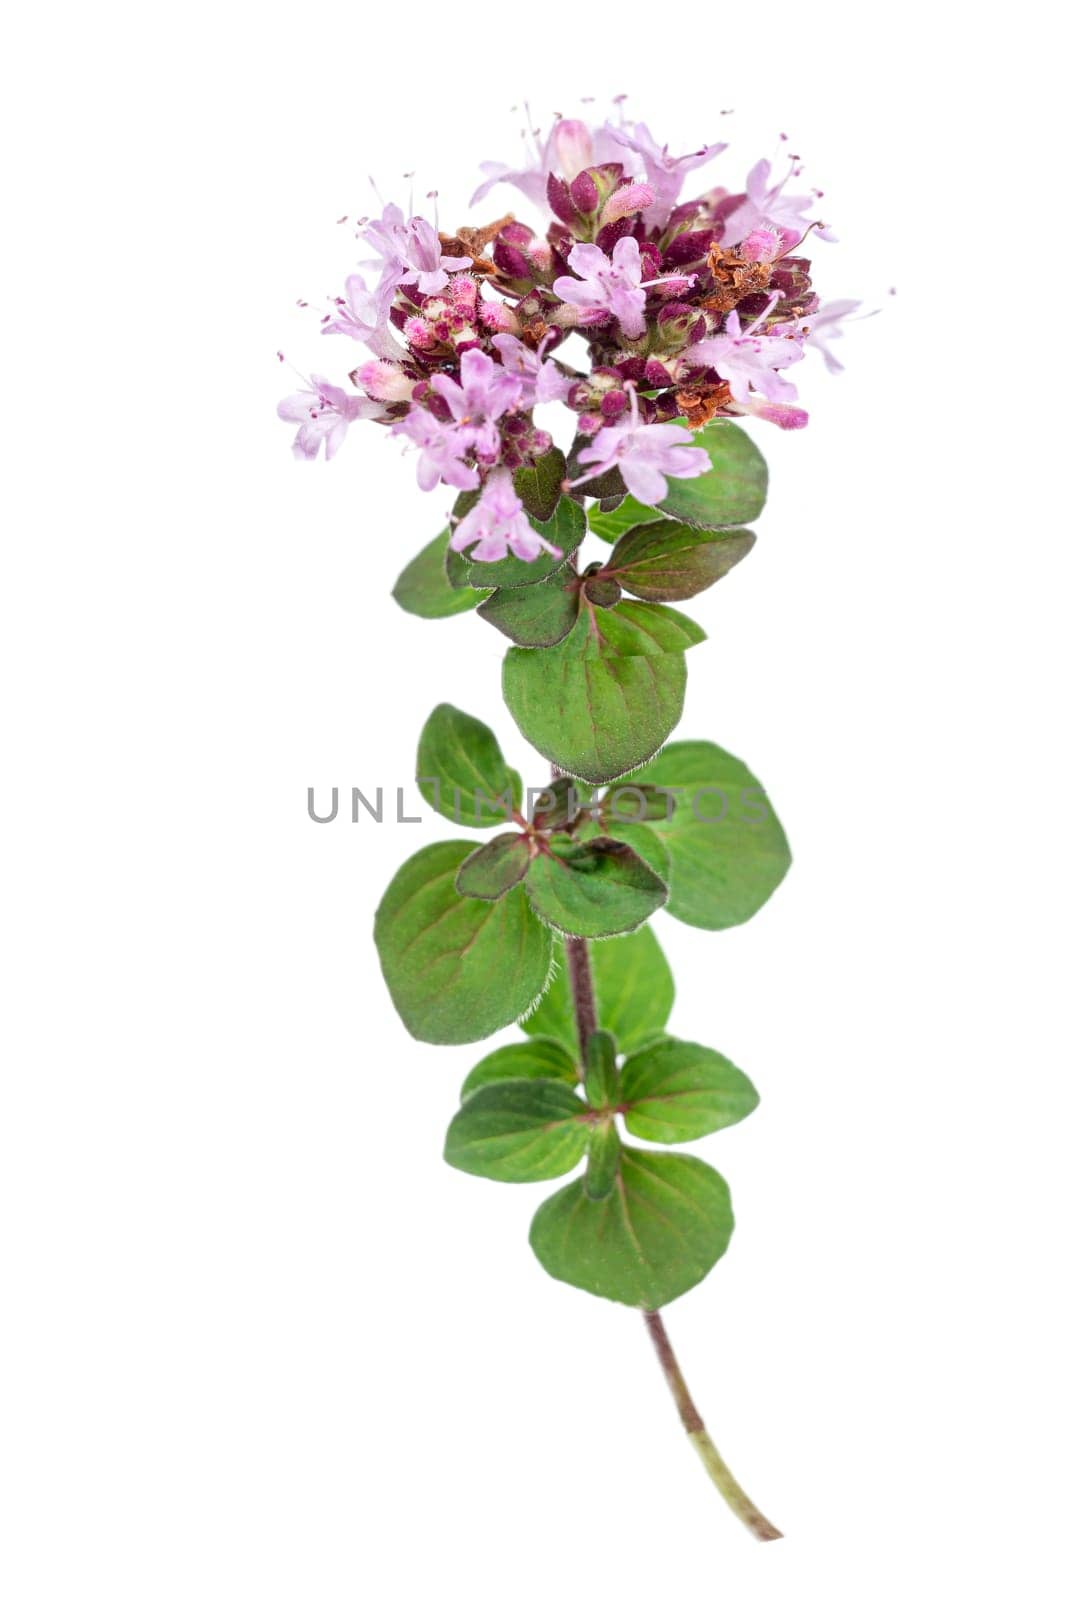 Oregano or marjoram leaves isolated on white background cutout by JPC-PROD